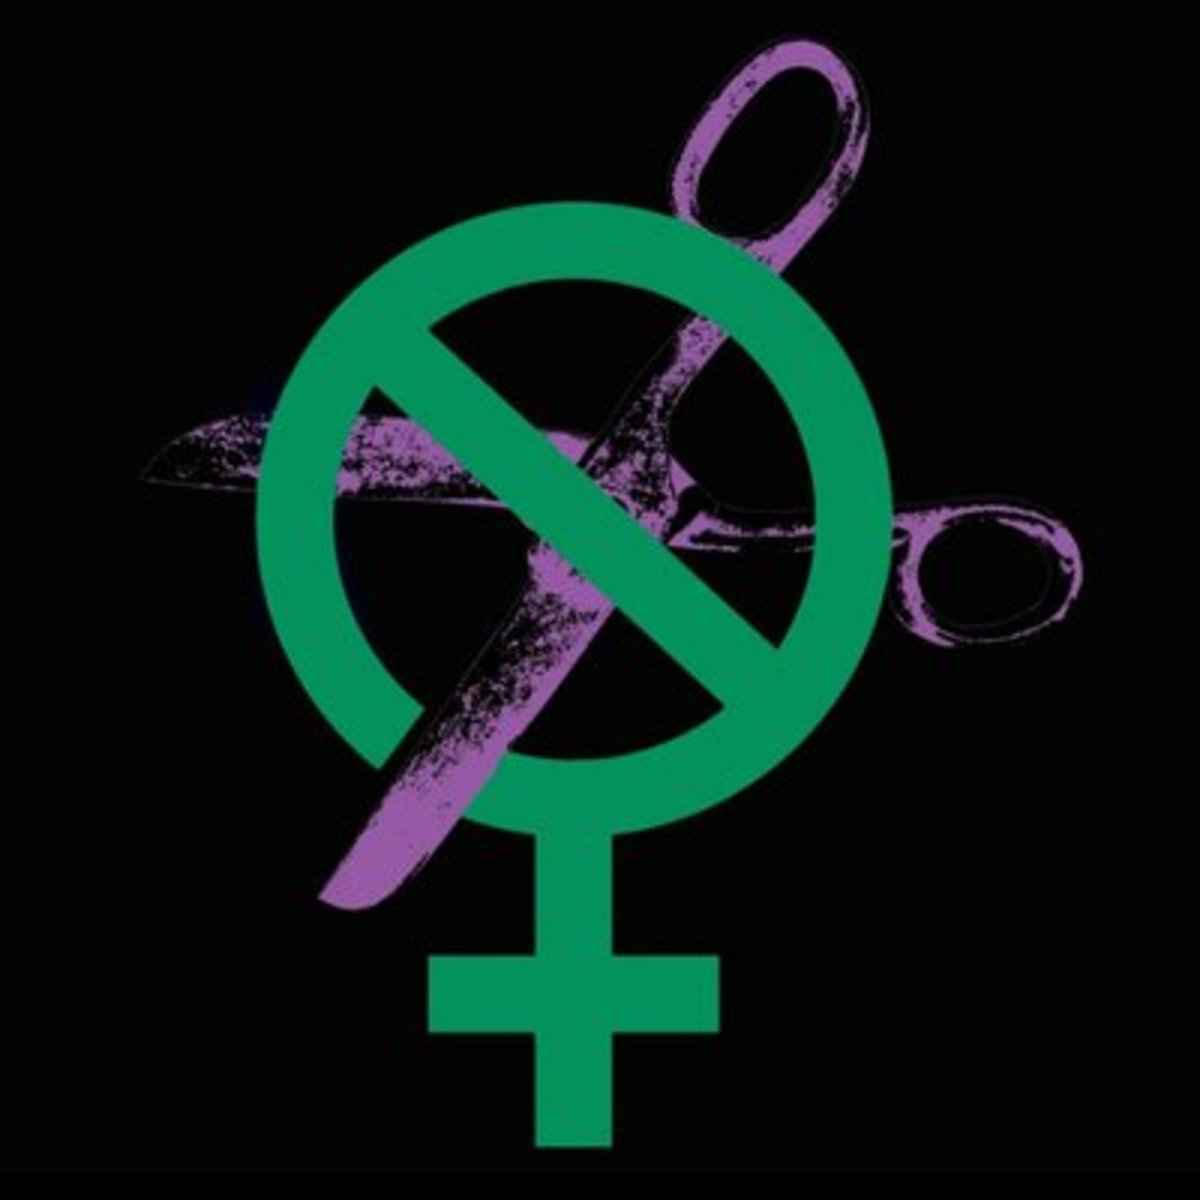  @SistersUncut signed our open letter against the Nordic Model Sisters Uncut are a feminist group taking direct action for domestic + sexual violence services since 2014. Read the letter here  https://decrimnow.org.uk/open-letter-on-the-nordic-model/  #notonordicmodel